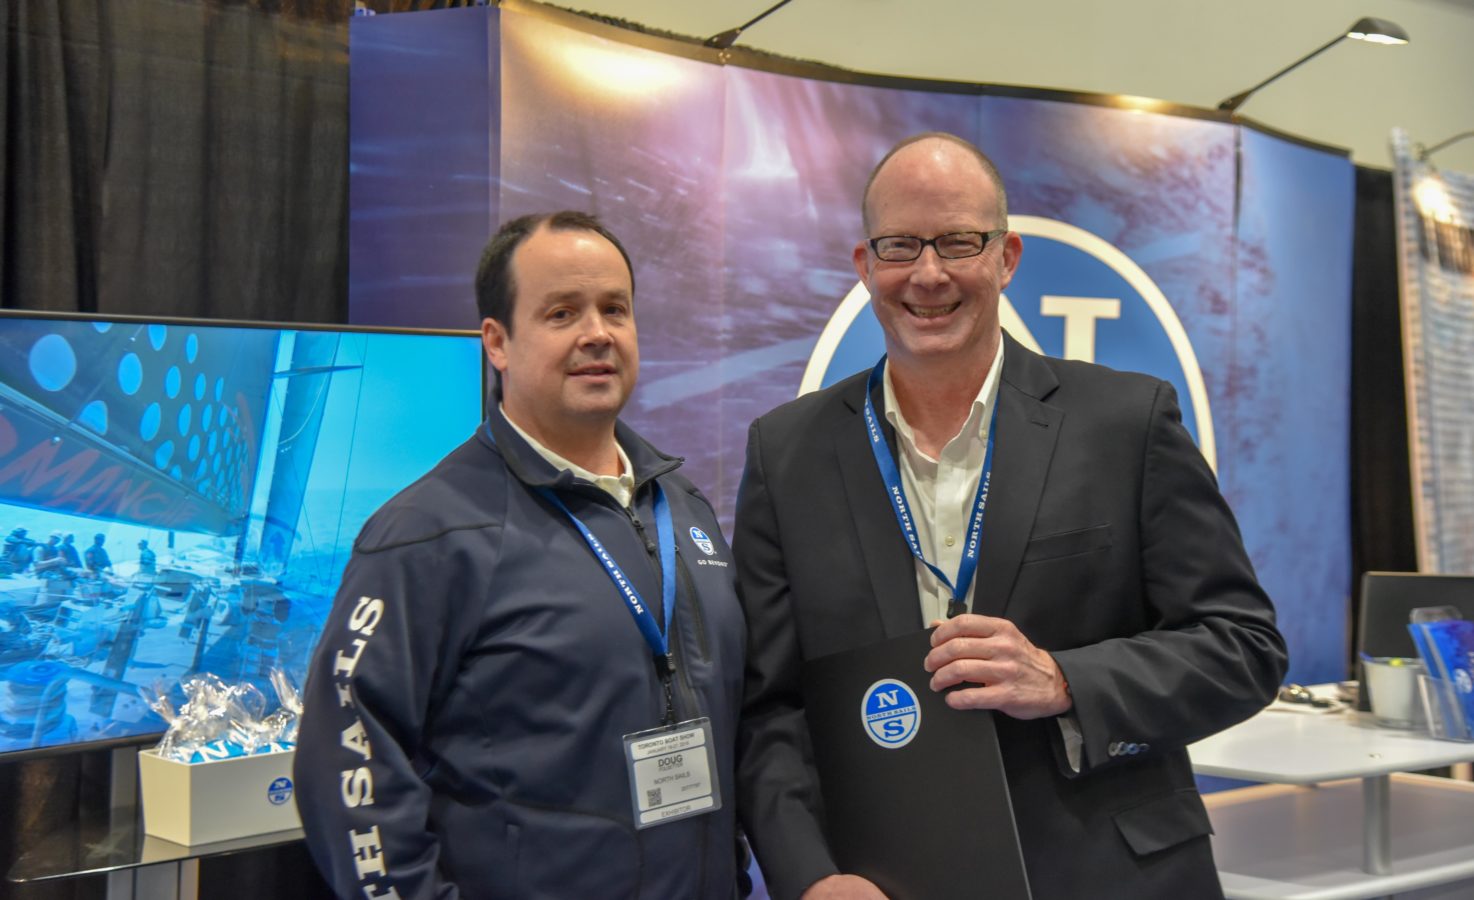 Toronto Boat Show Networking